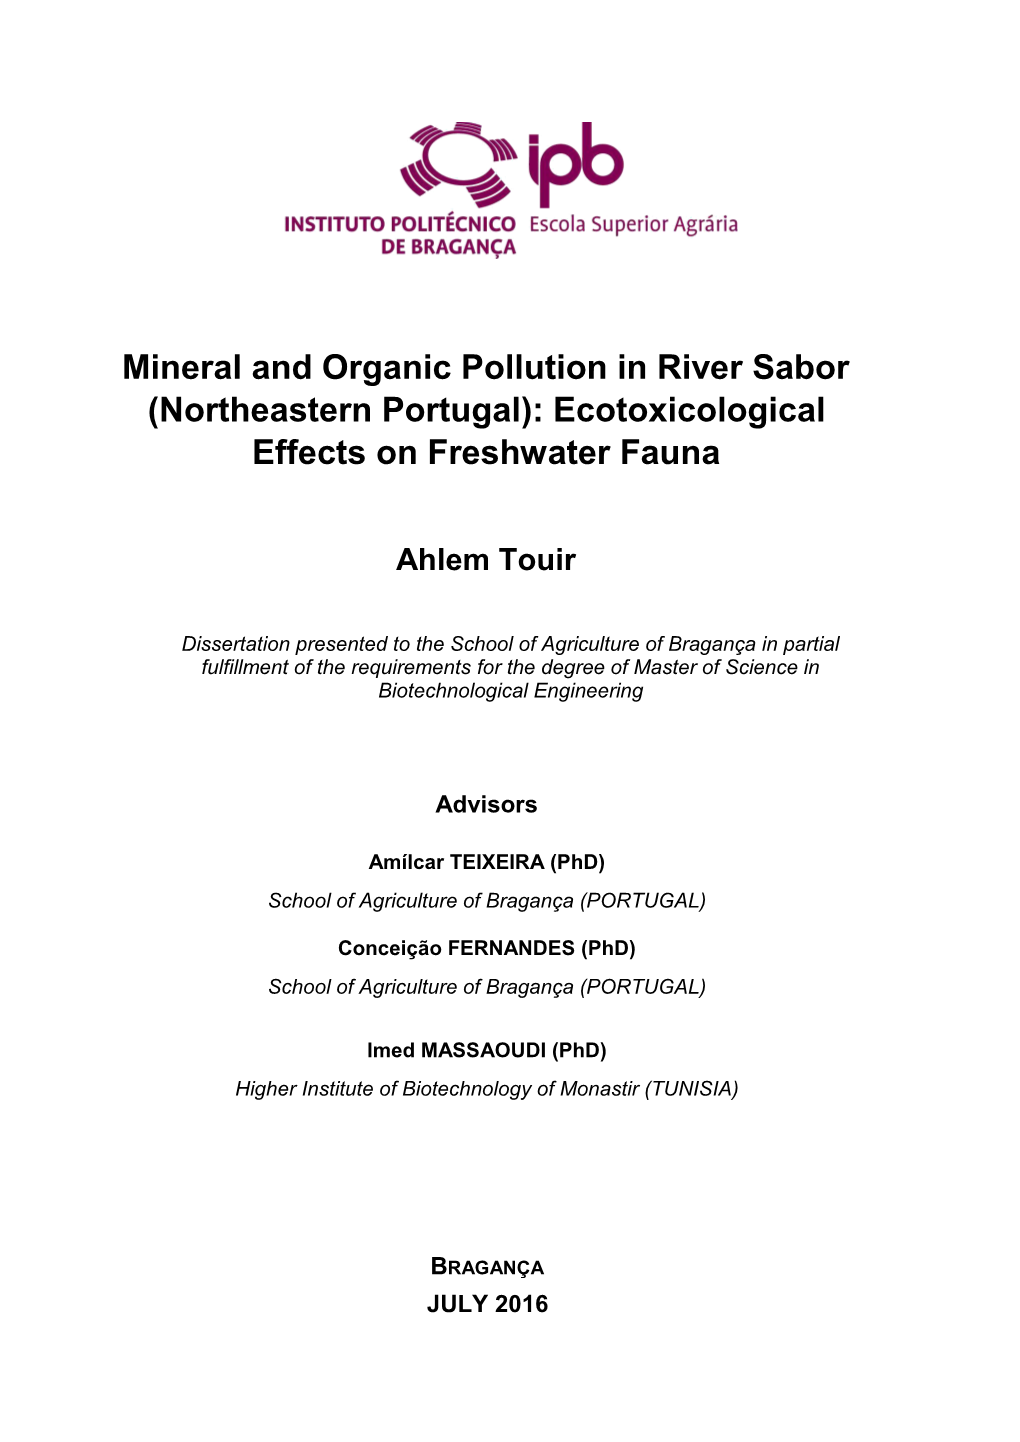 Mineral and Organic Pollution in River Sabor (Northeastern Portugal